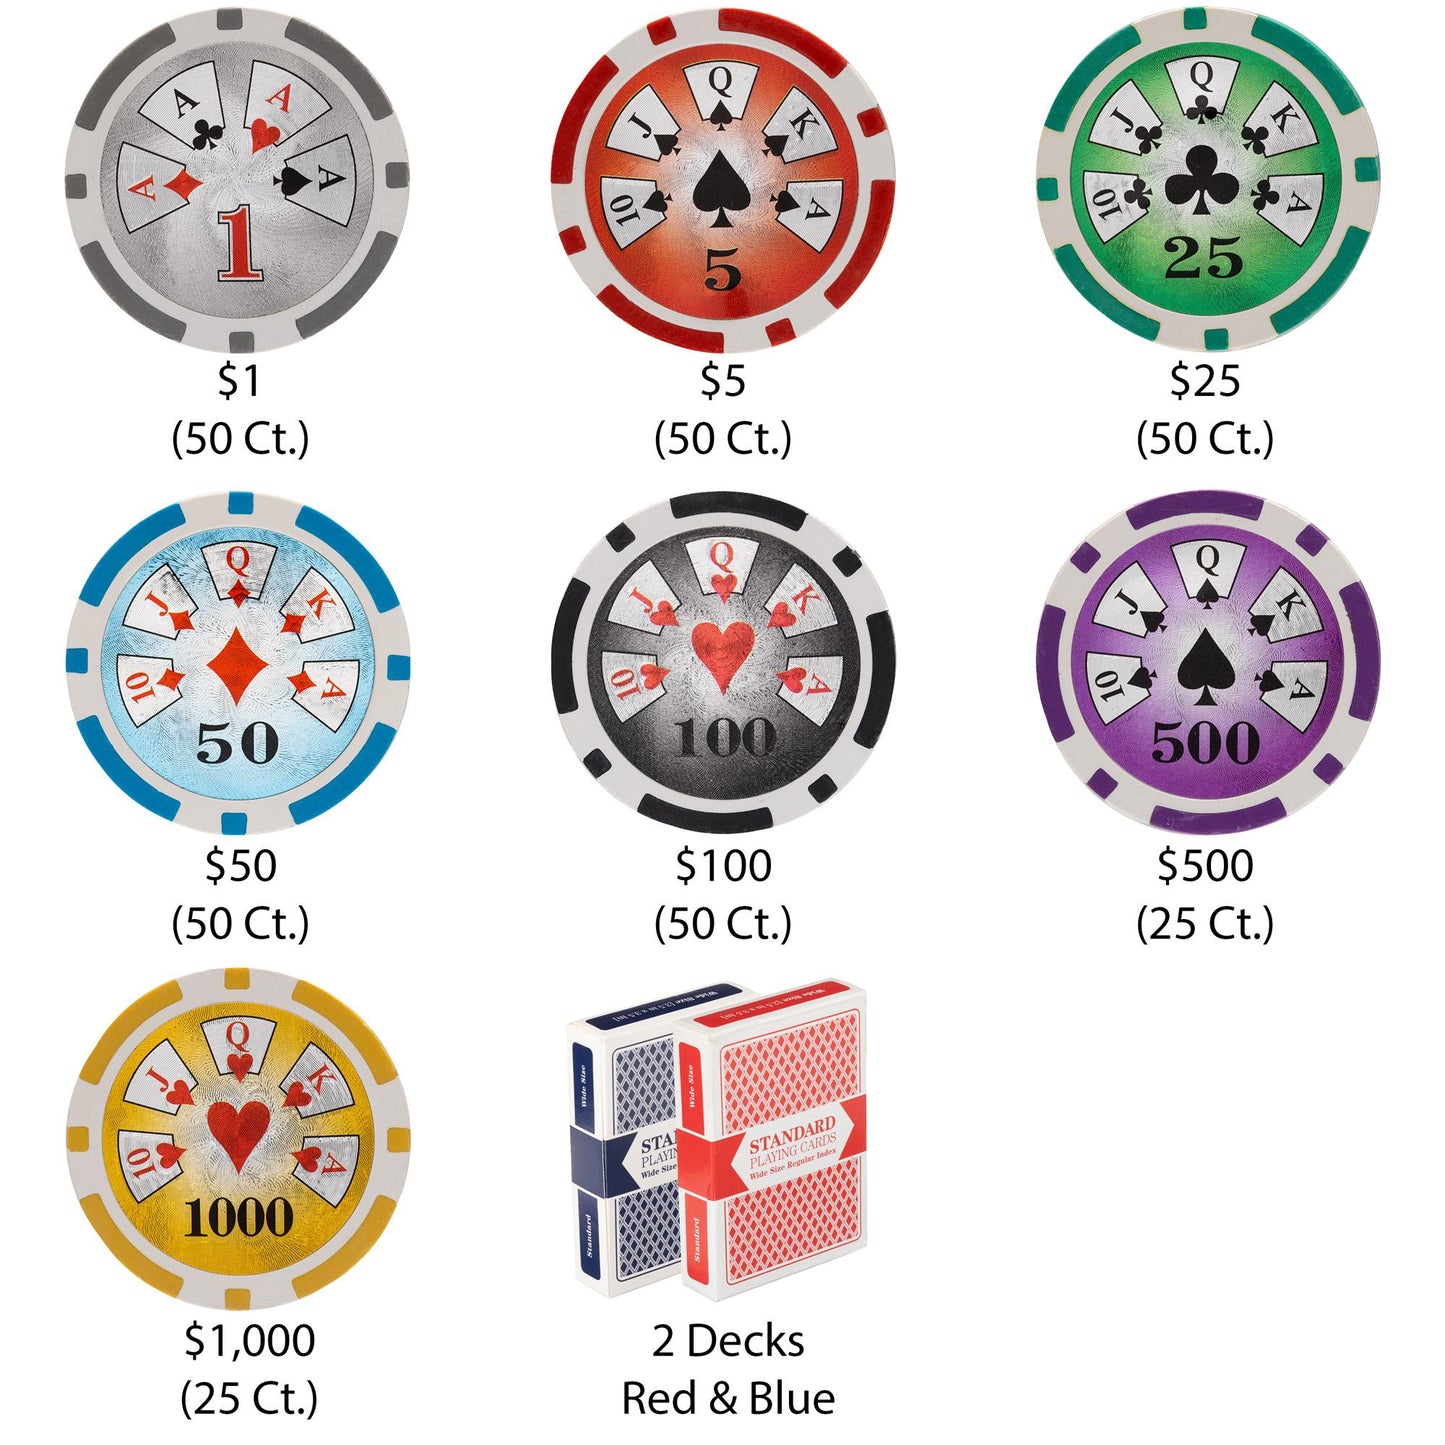 300 Hi Roller Poker Chips with Wooden Carousel